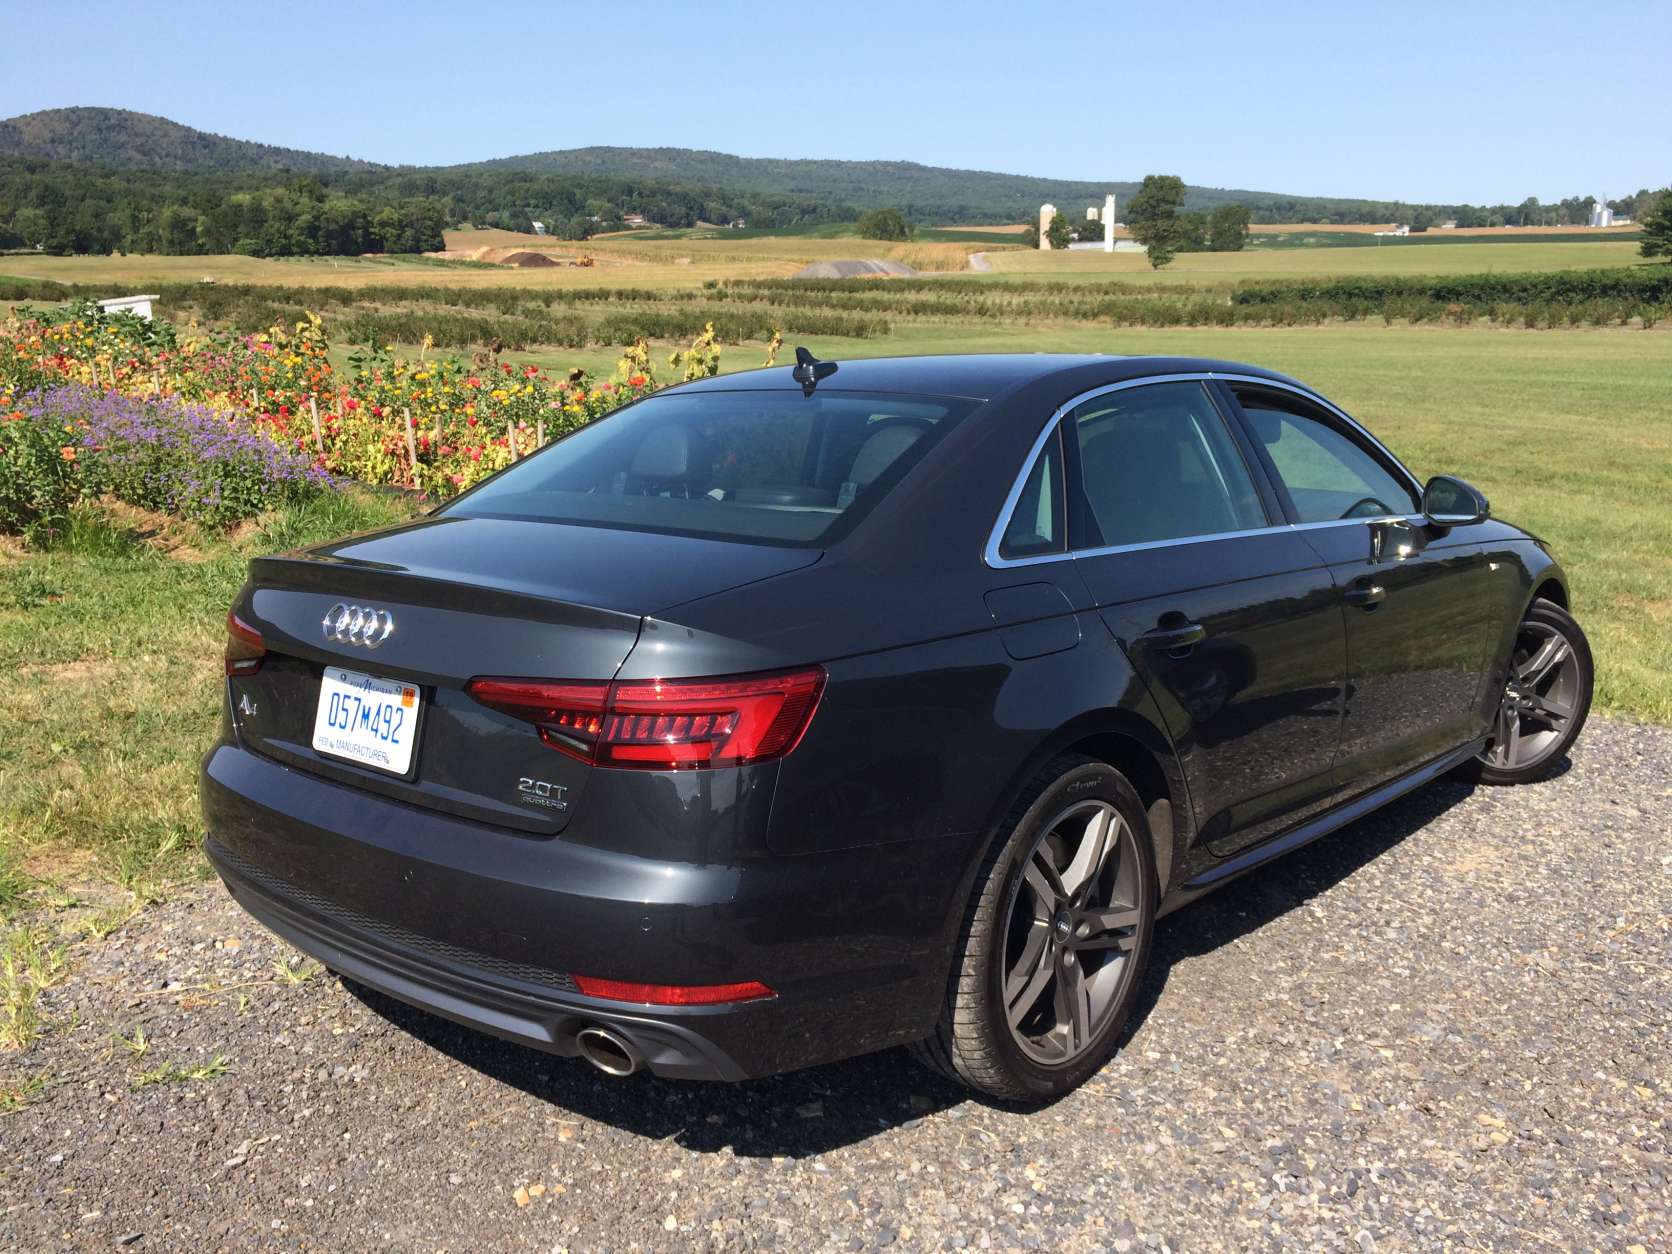 The 2017 Audi A4 Puts Technology at the Forefront